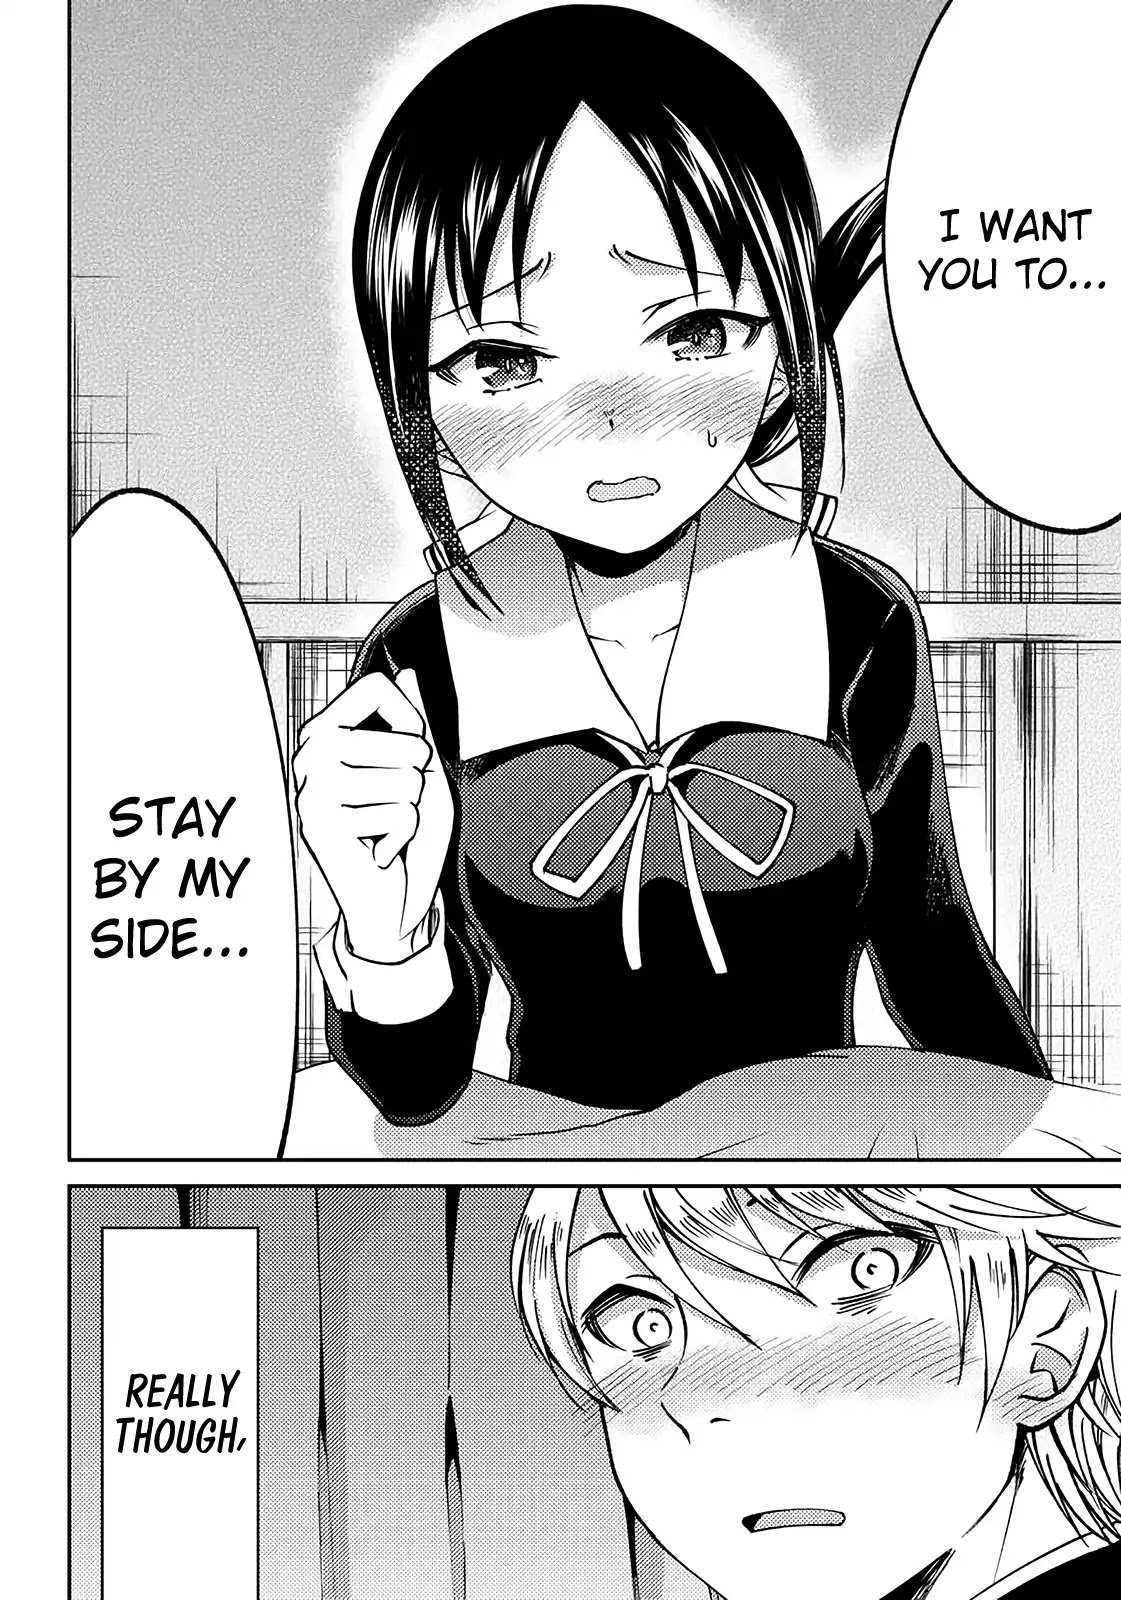 kaguya-wants-to-be-confessed-to-official-doujin-chap-3-15